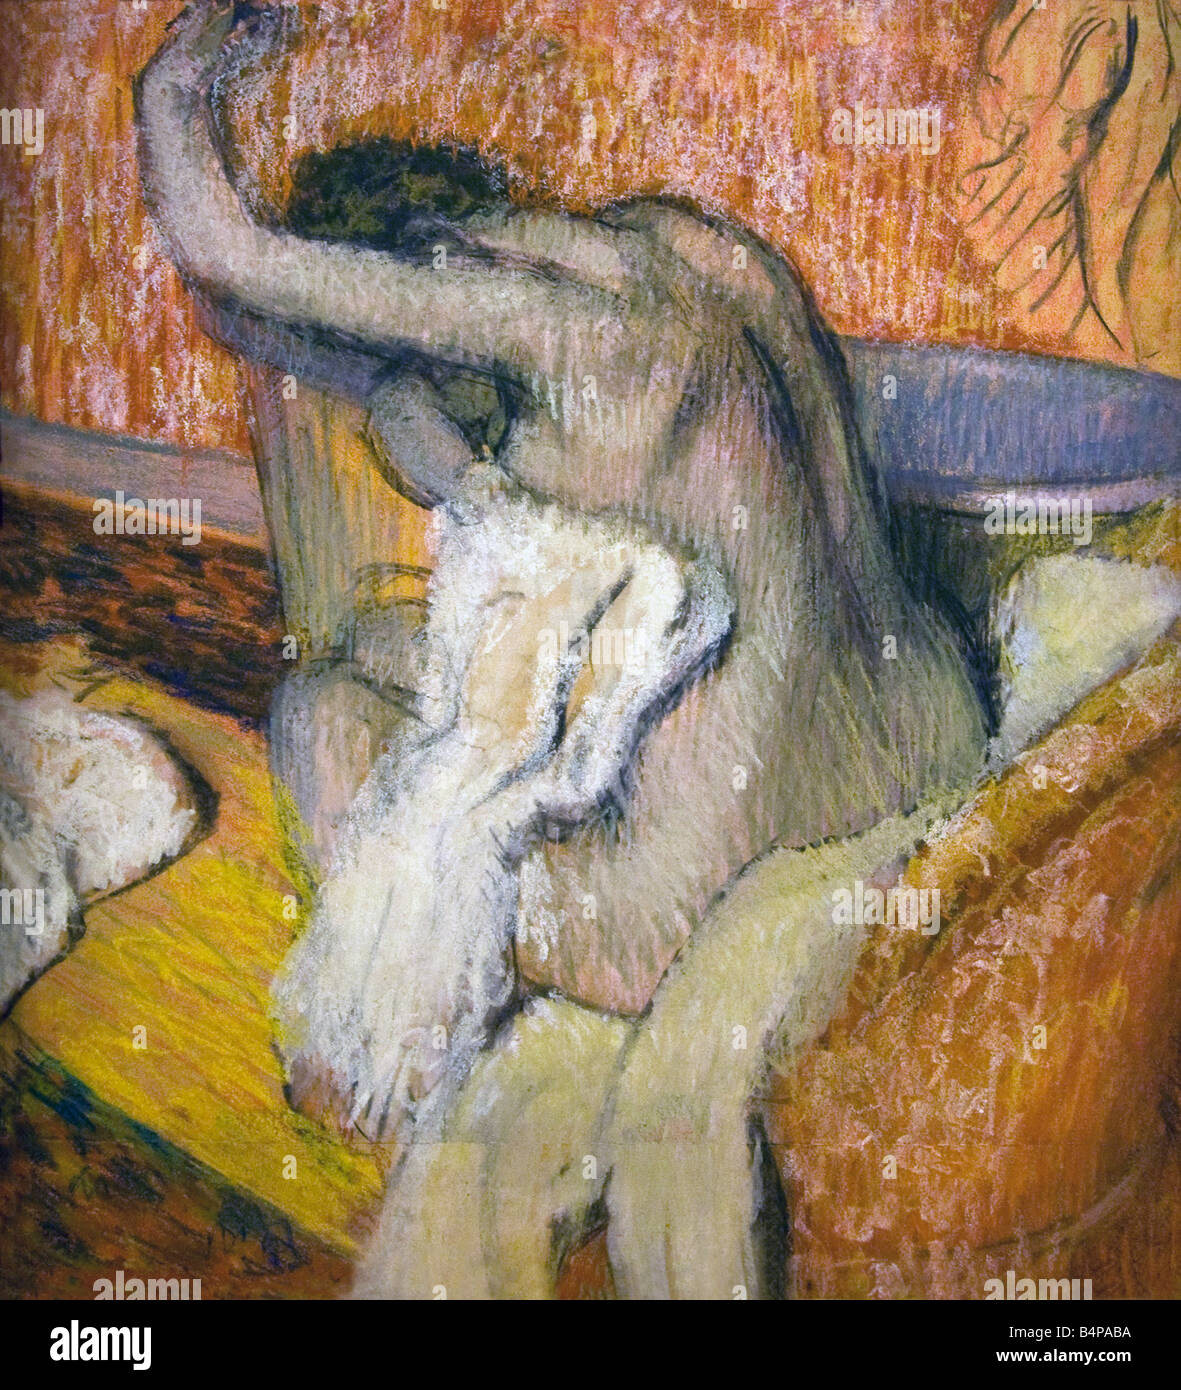 'After the bath, woman drying herself' painted by Edgar Degas pastel on paper 1895-1900 Courtauld Institute Gallery London Stock Photo